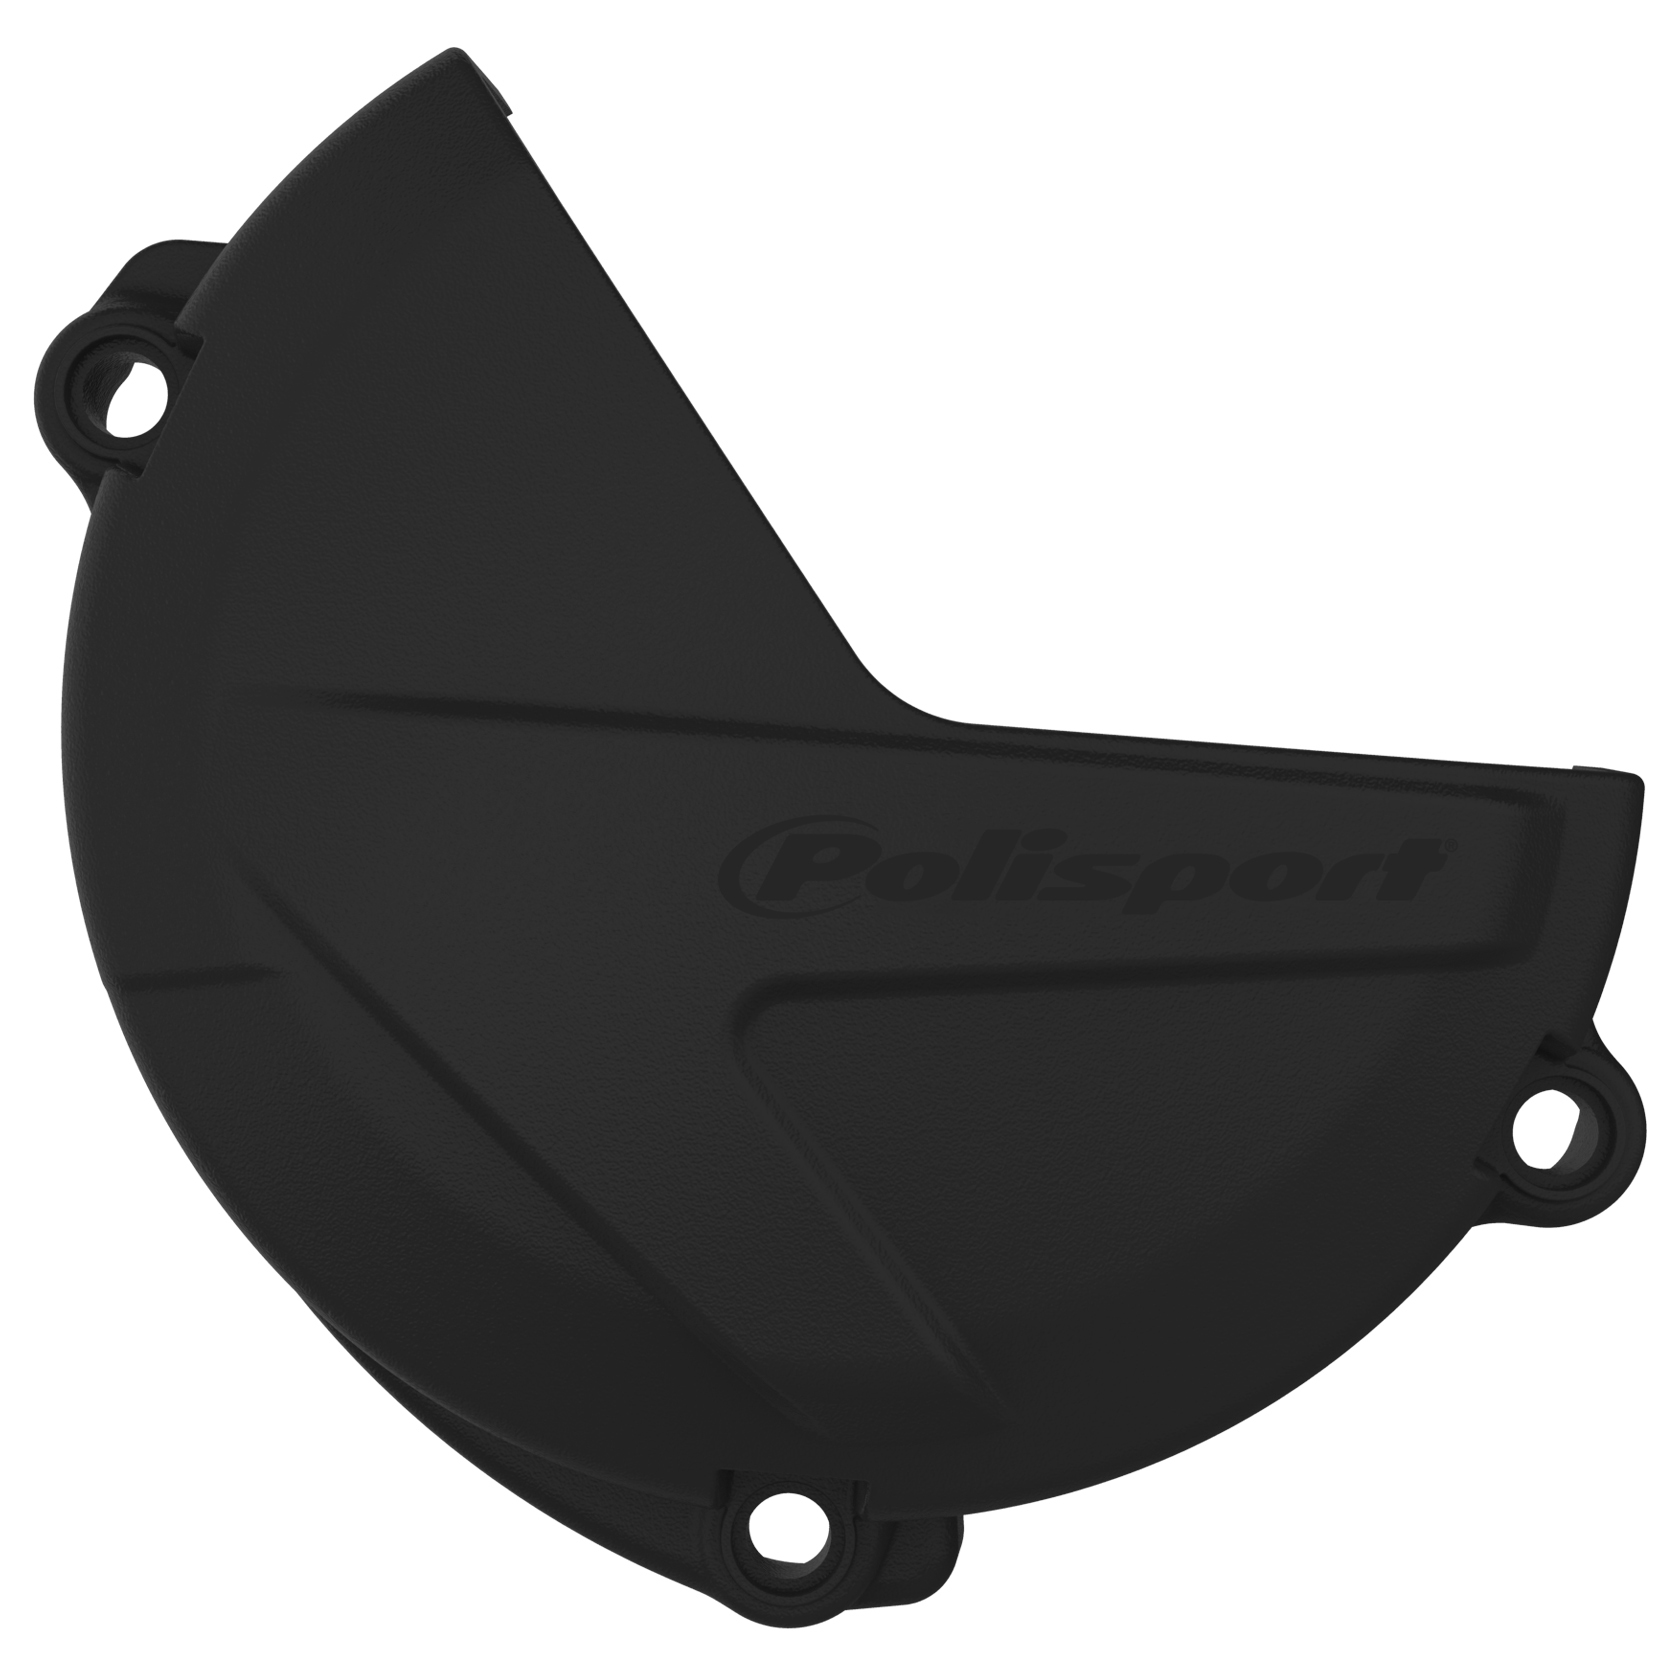 Clutch Cover Protector - Black - For 19-21 Yamaha YZ250F & 20-21 WR250F,YZ250FX - Click Image to Close